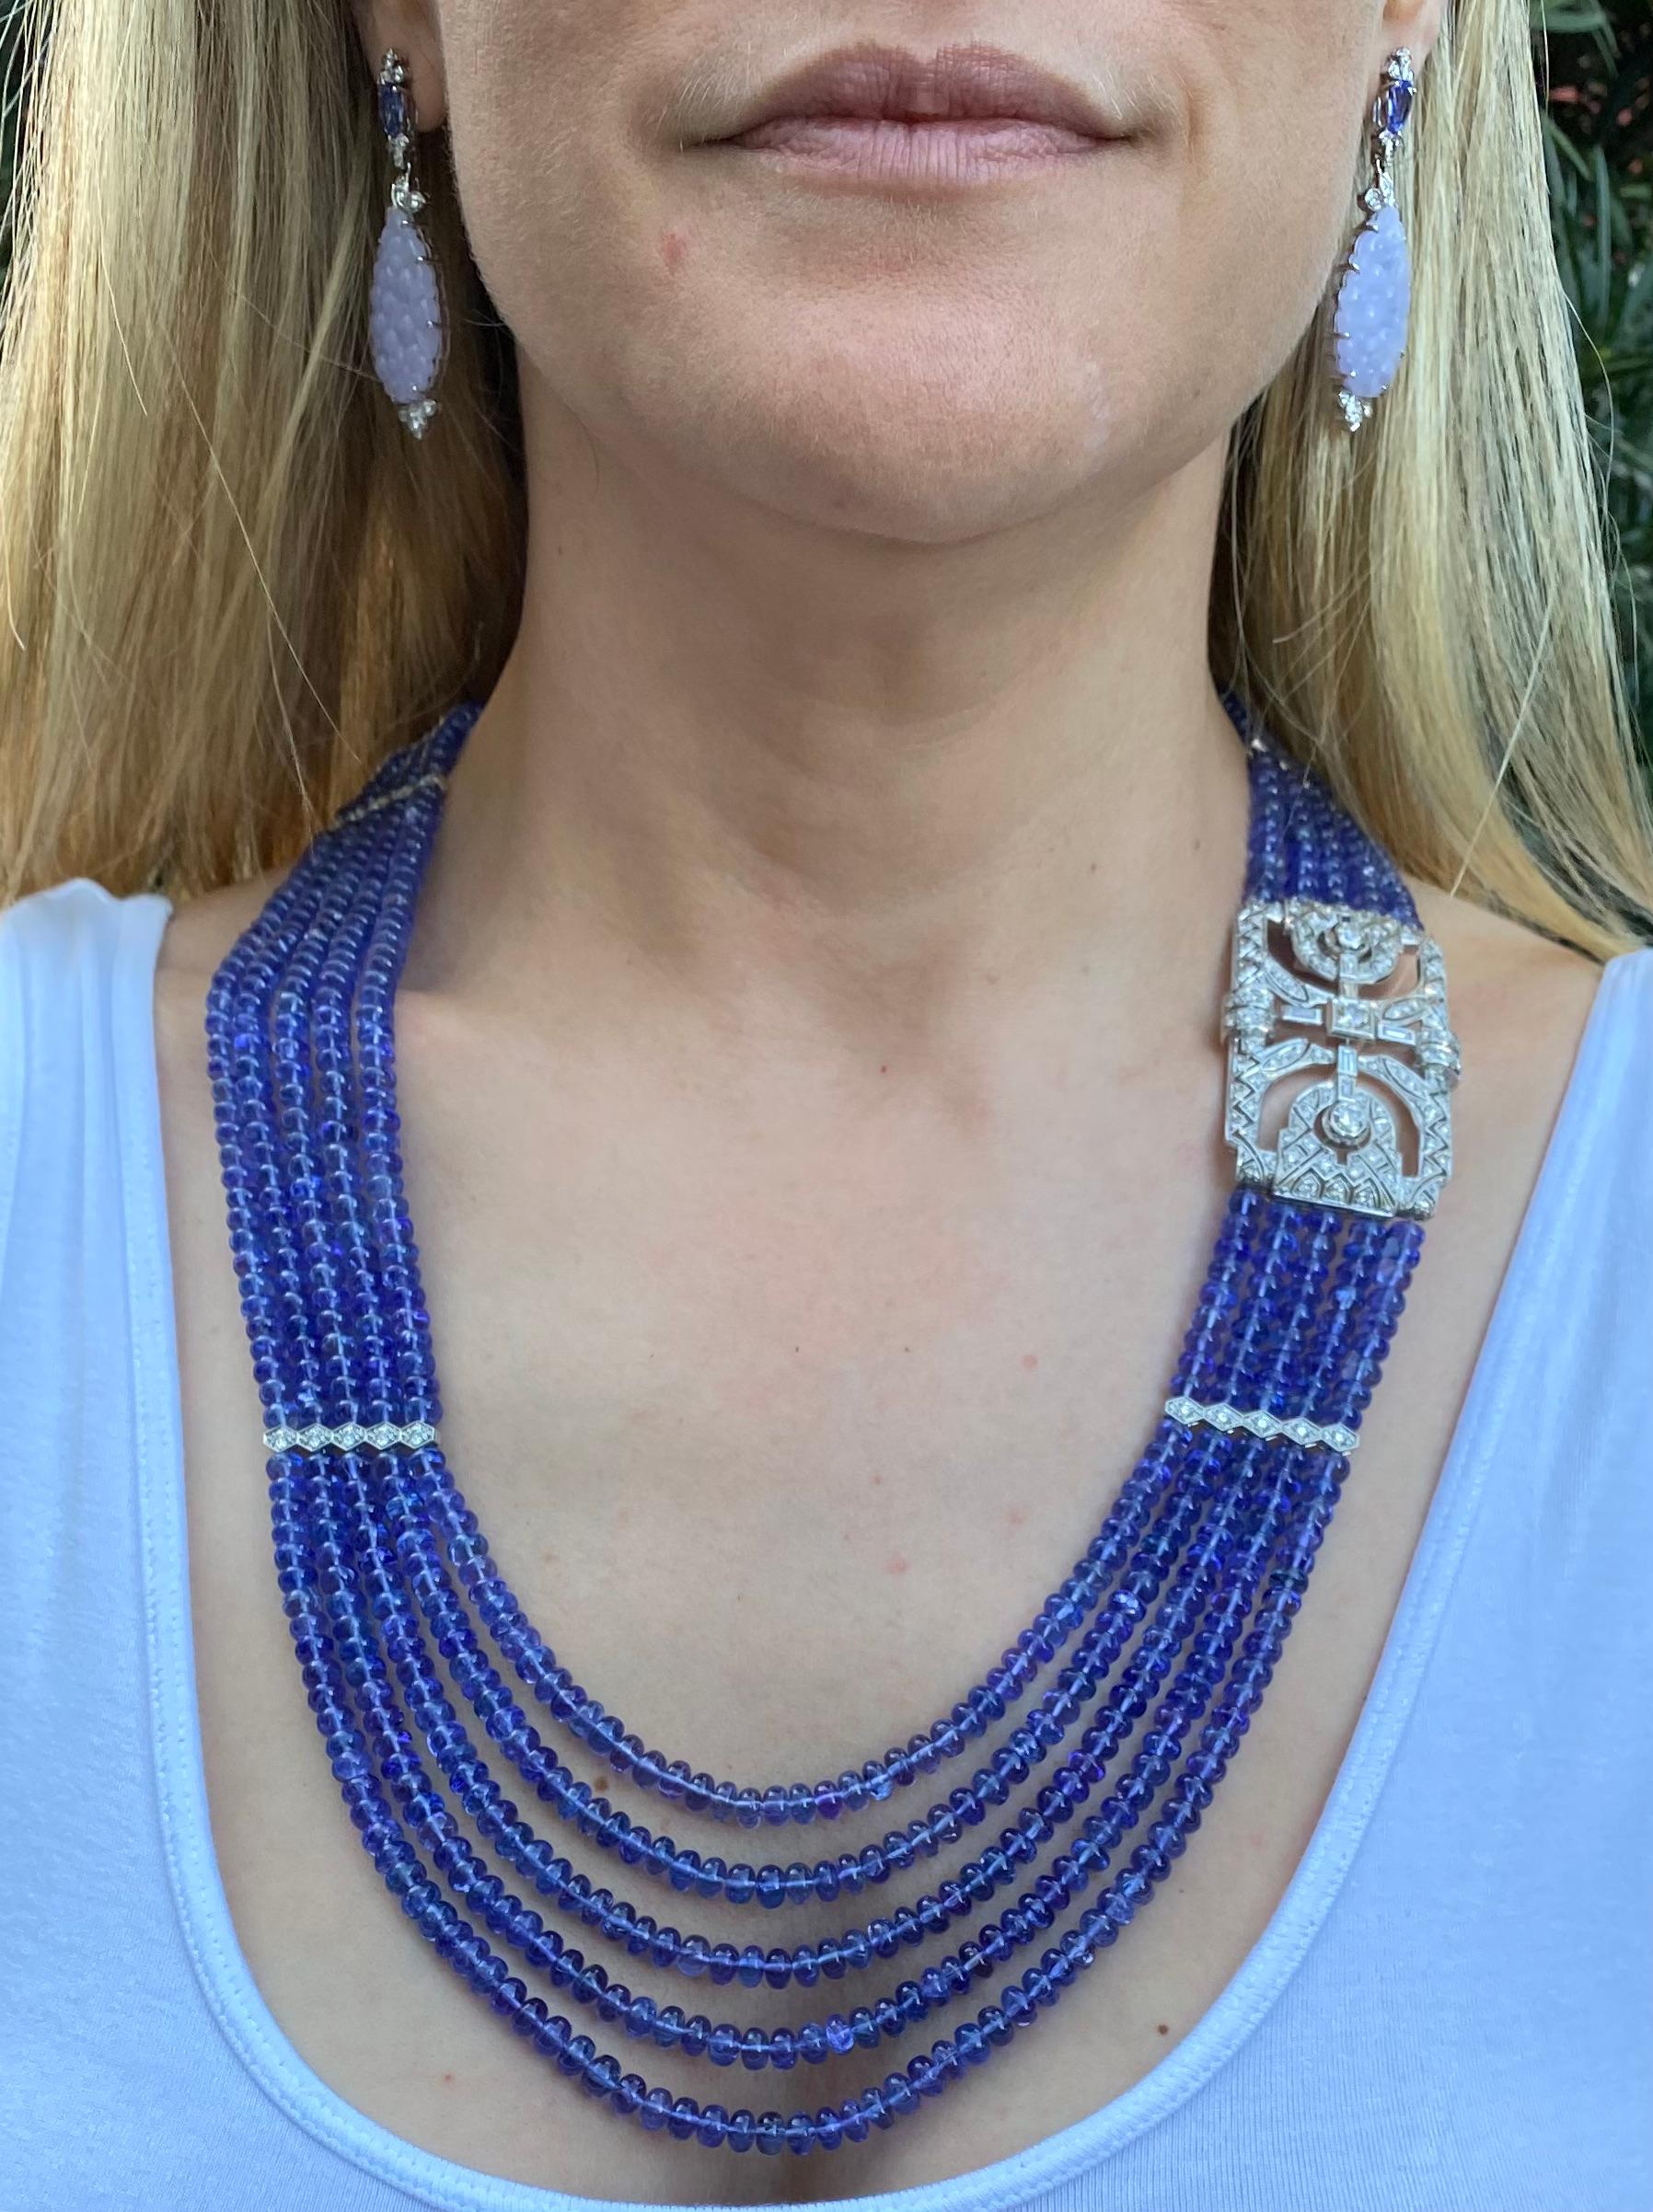 Where to begin on this striking and completely one of a kind necklace?  Inspiration came with the discovery of an antique 7 Carat Diamond and Platinum pin imagined as a striking clasp. Shortly thereafter, Kiersten Elizabeth was entranced by the